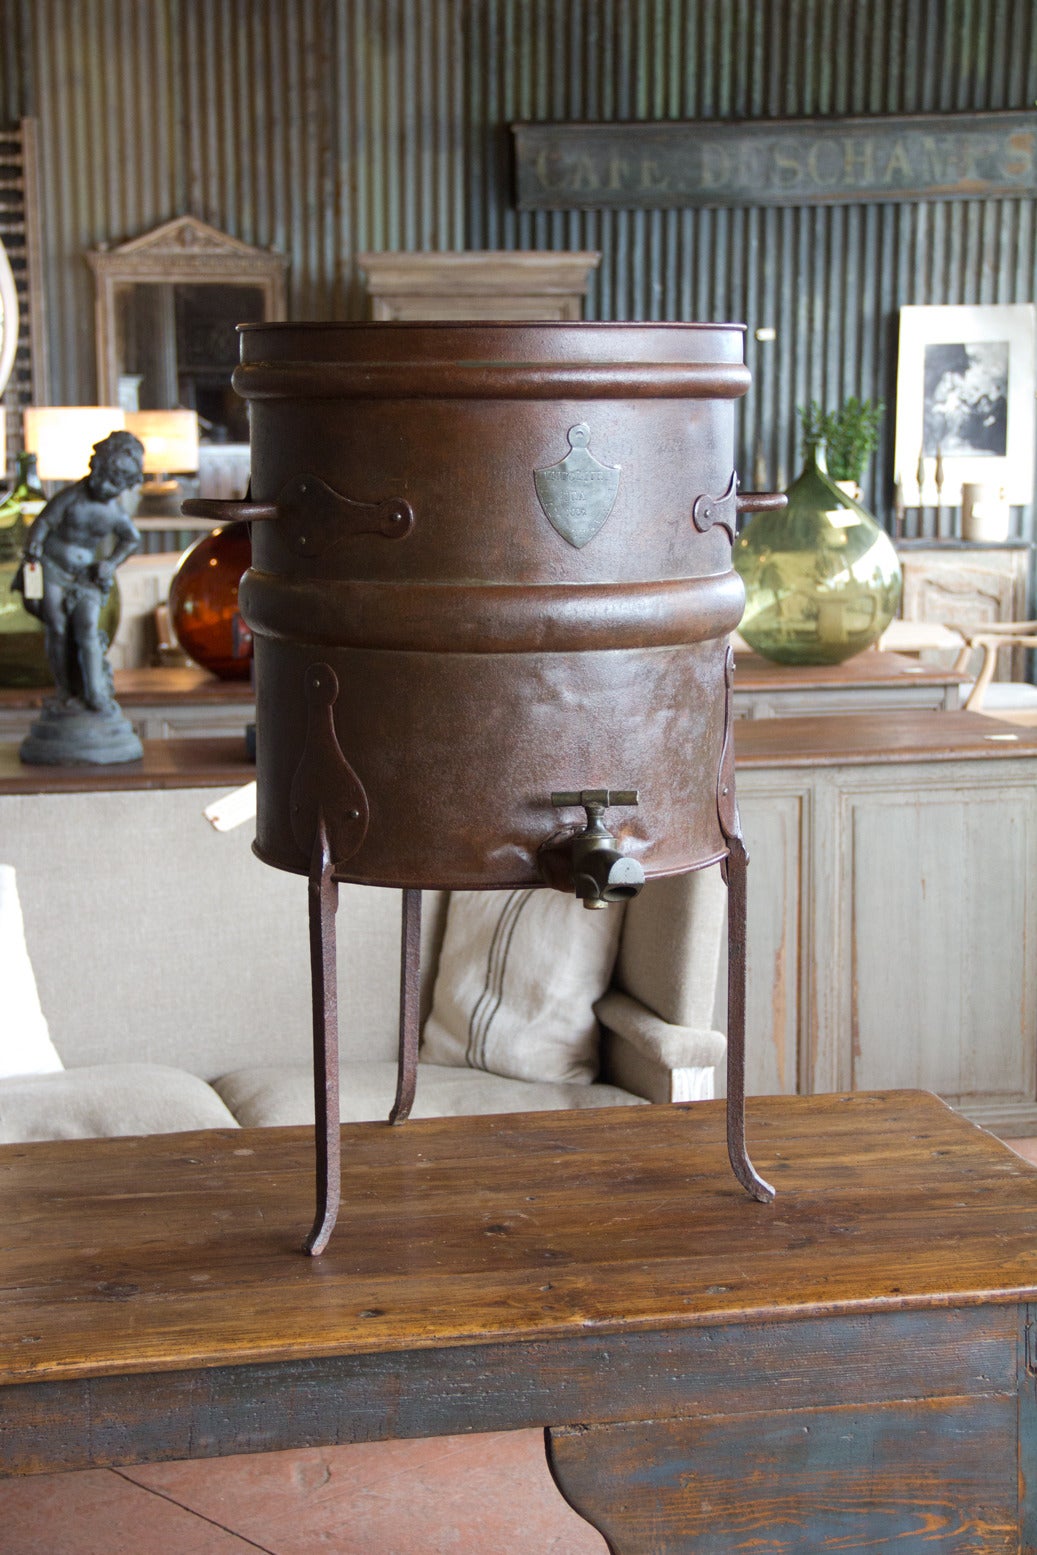 Rare antique tole and iron hectoliter wine measure with spigot, on a Stand with maker's mark and date. It was used to measure up to 100 liters of wine from the barrel, Jura, France.

We do have one more available. Please contact us if you would